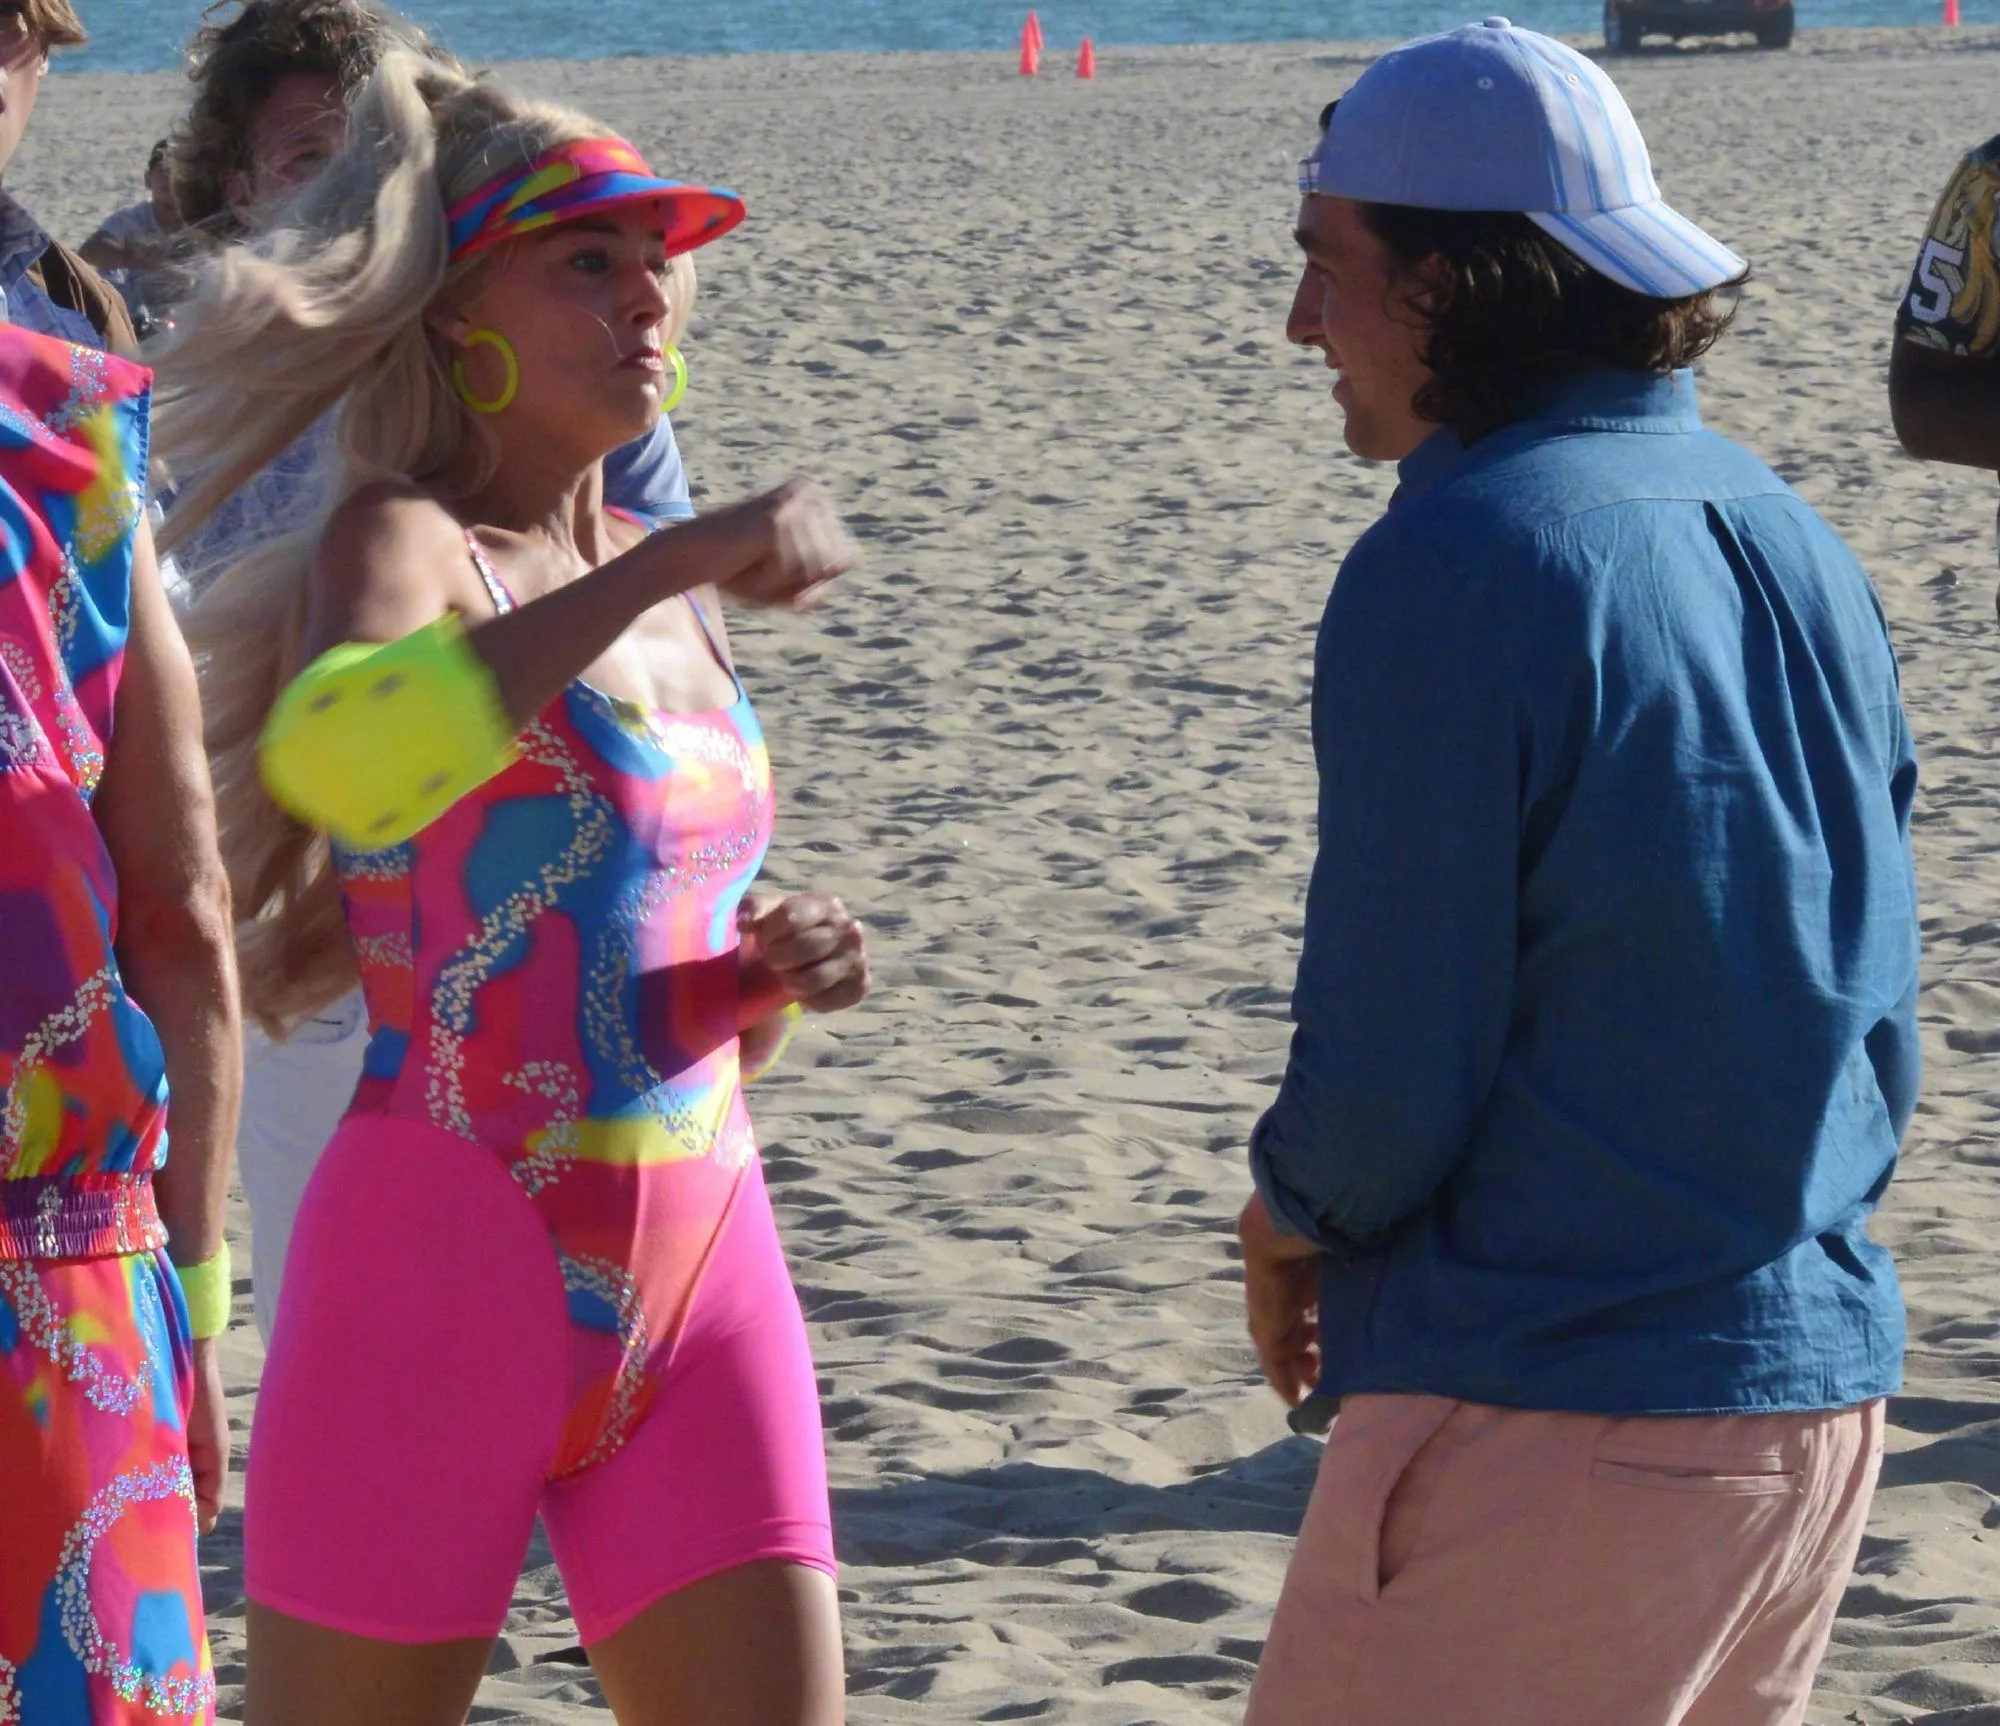 New set photos of 'Barbie' revealed, Margot Robbie as strong barbie beating rogue | FMV6